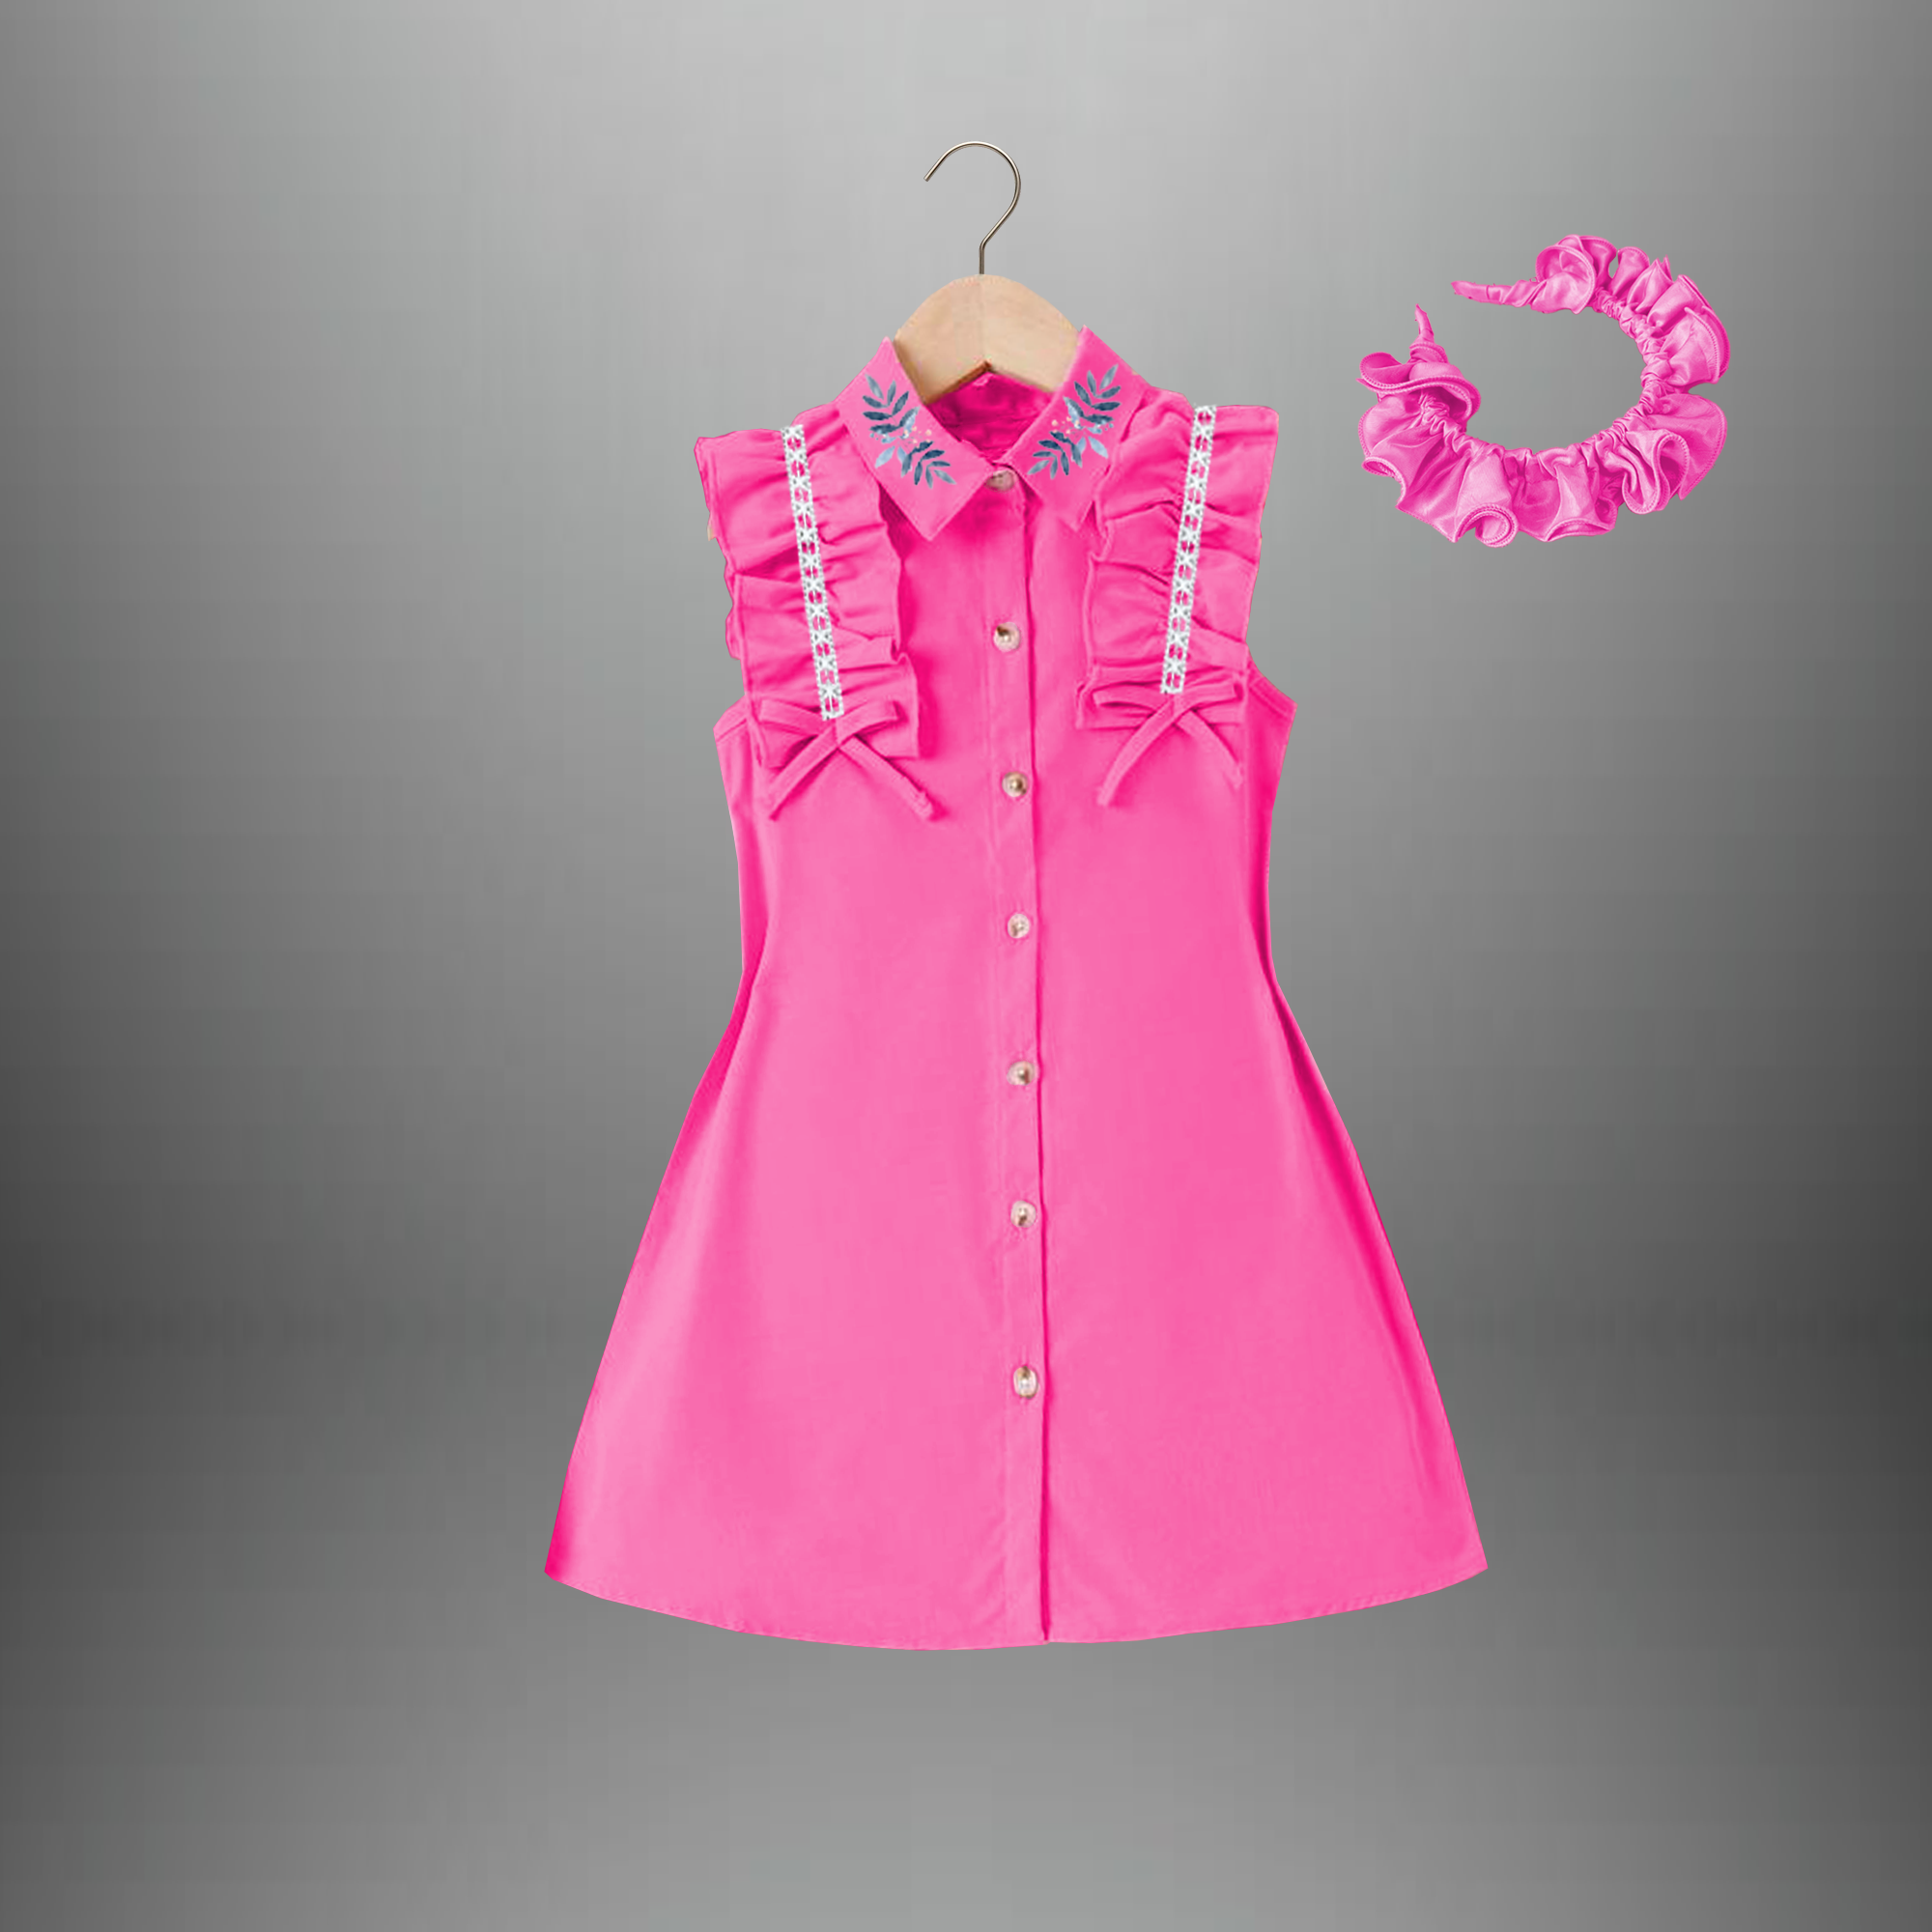 Girl's pretty pink shirt dress with frills and lace & a free hairband-RKFCW425